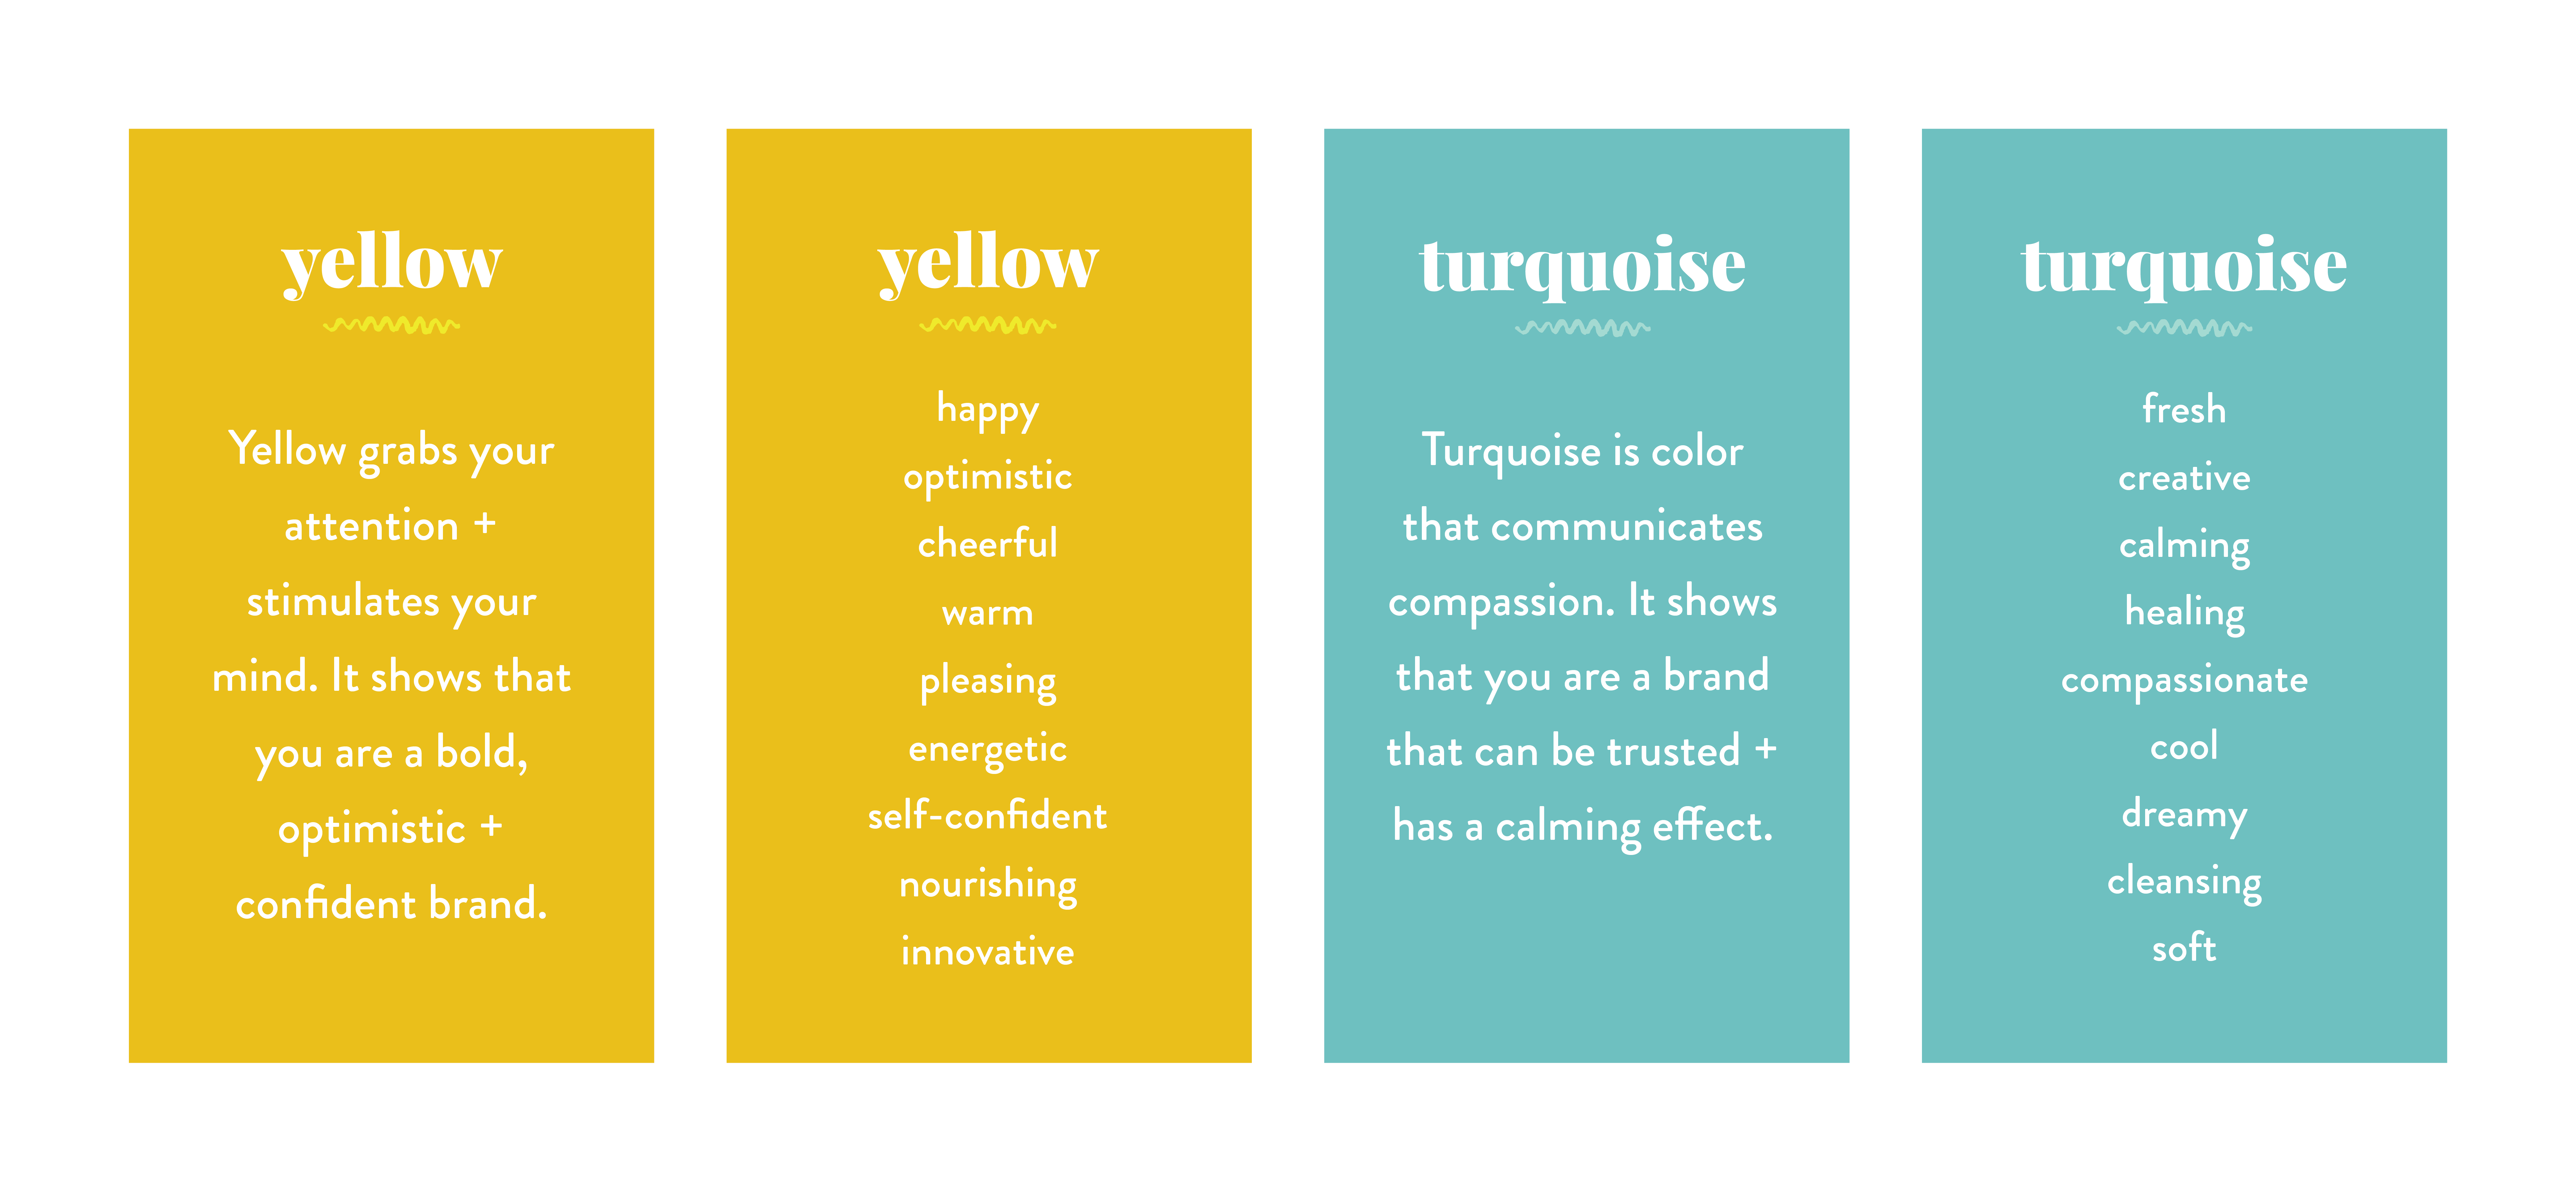 Psychology behind yellow and turquoise